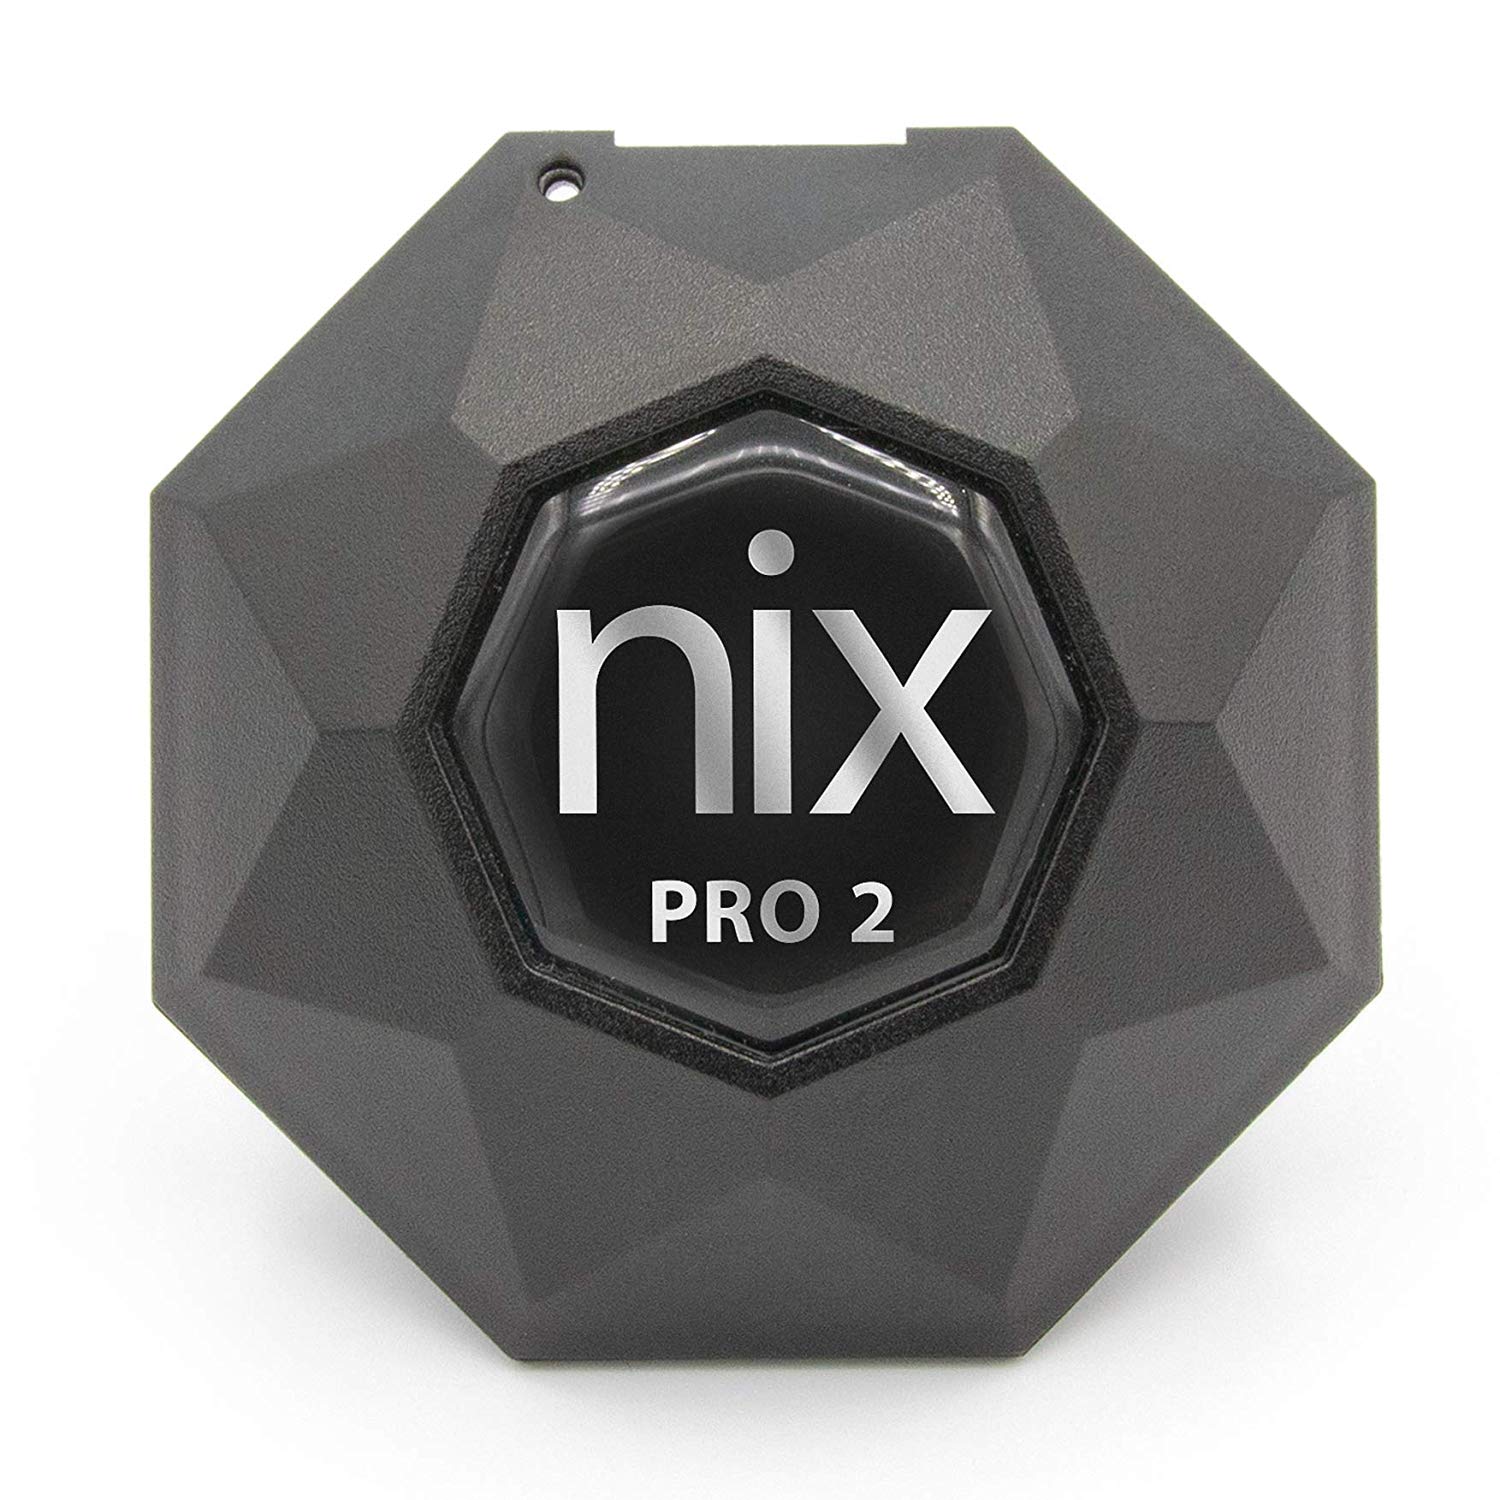 Nix Pro Color Sensor - Professional Color Matching Tool - Identify and match paint and digital color values instantly